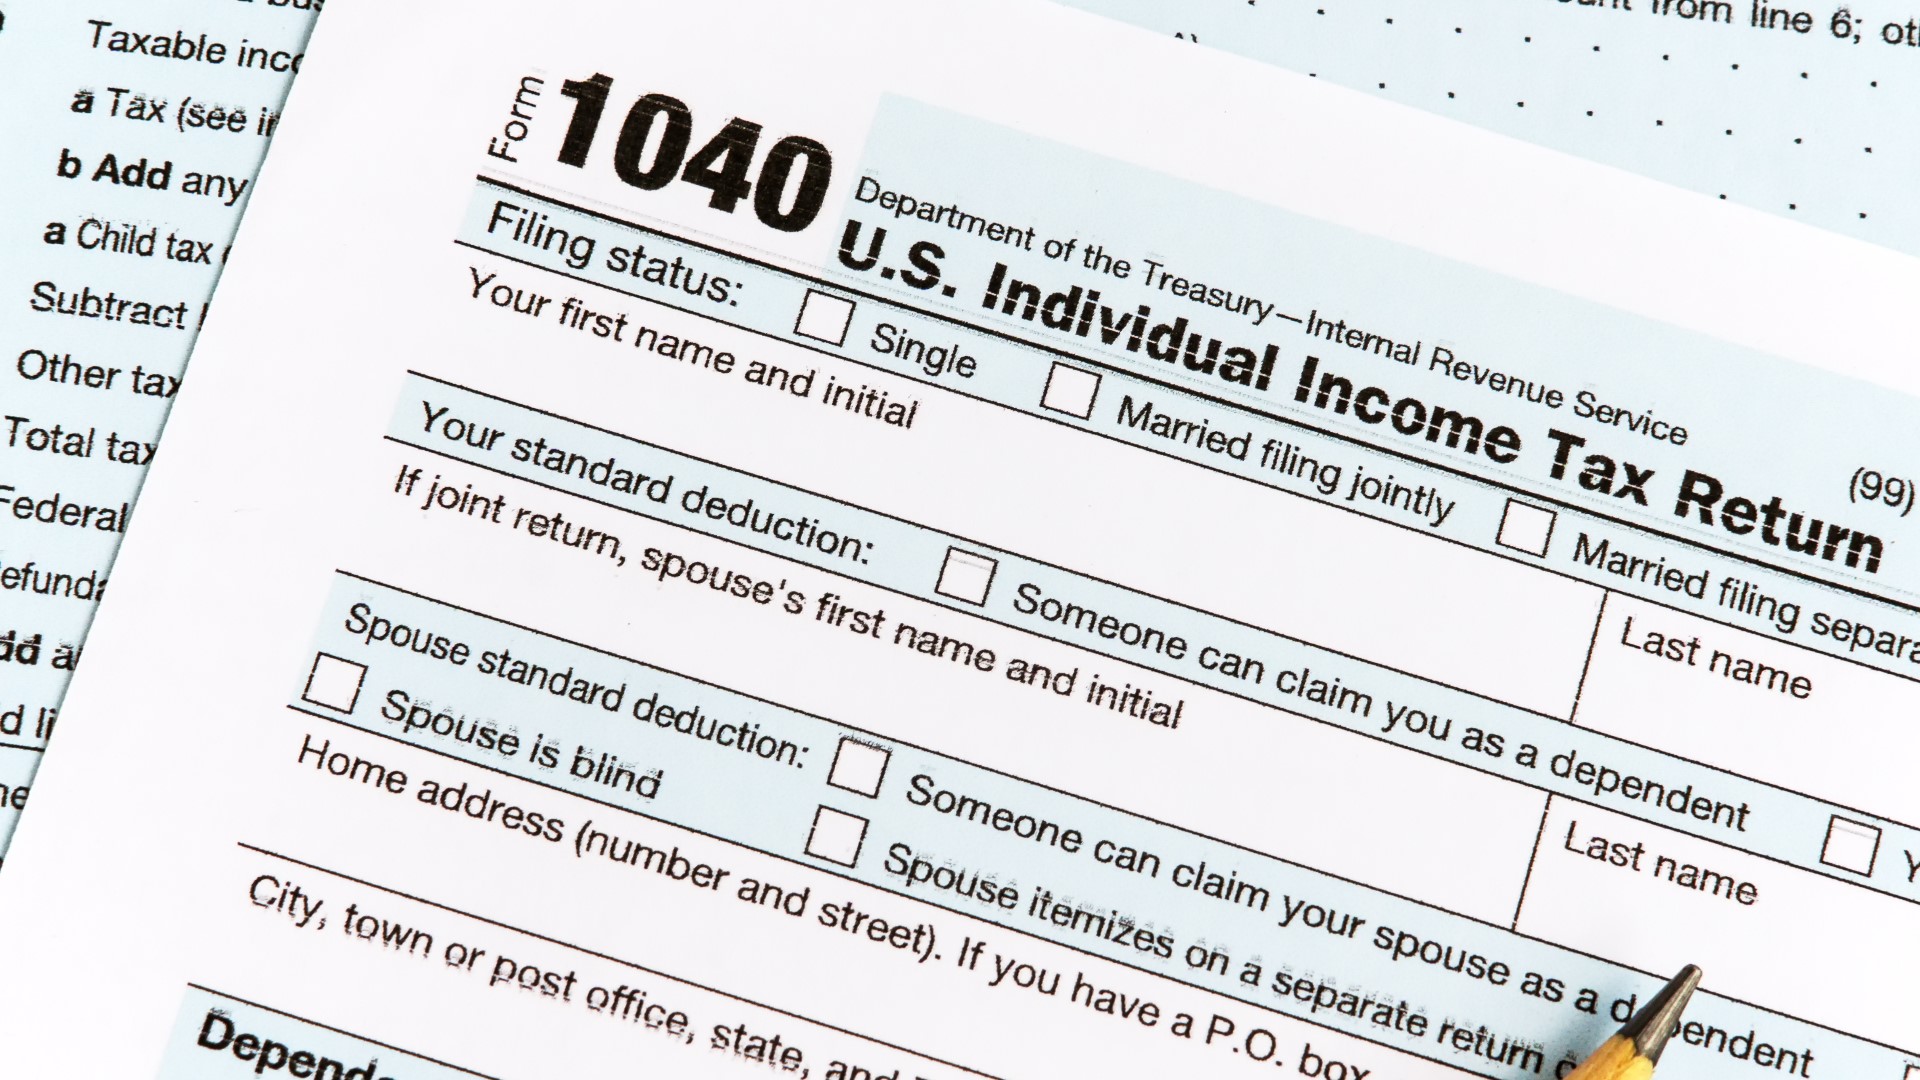 south-carolina-taxpayers-could-soon-be-eligible-for-100-rebate-wcnc